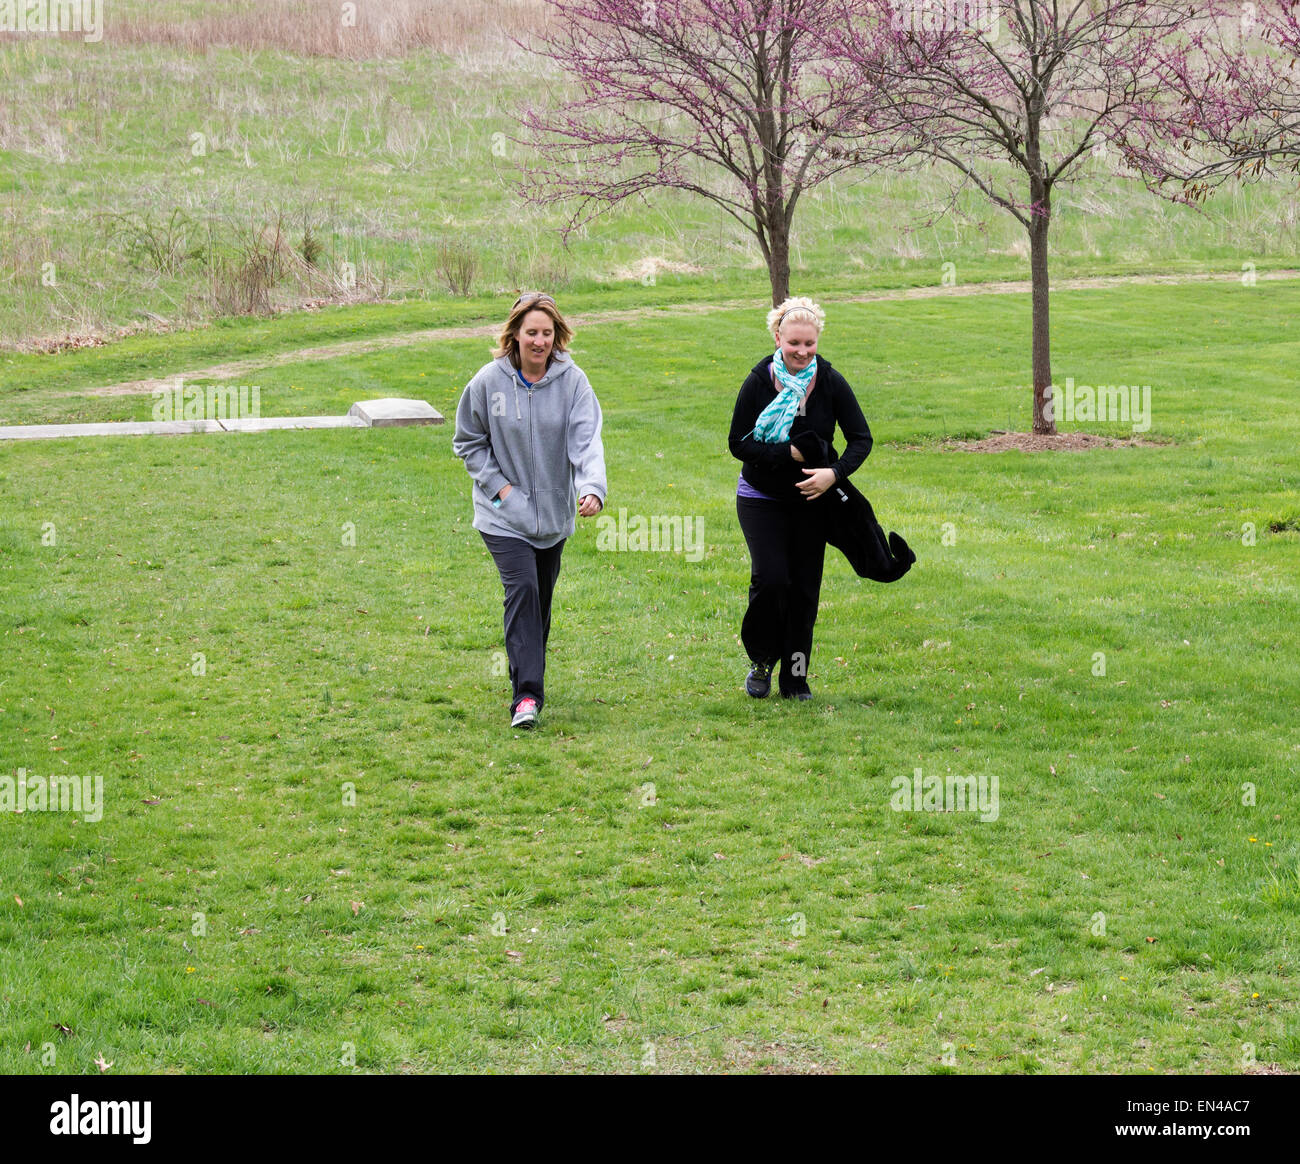 Two women walking and talking in the park. Stock Photo